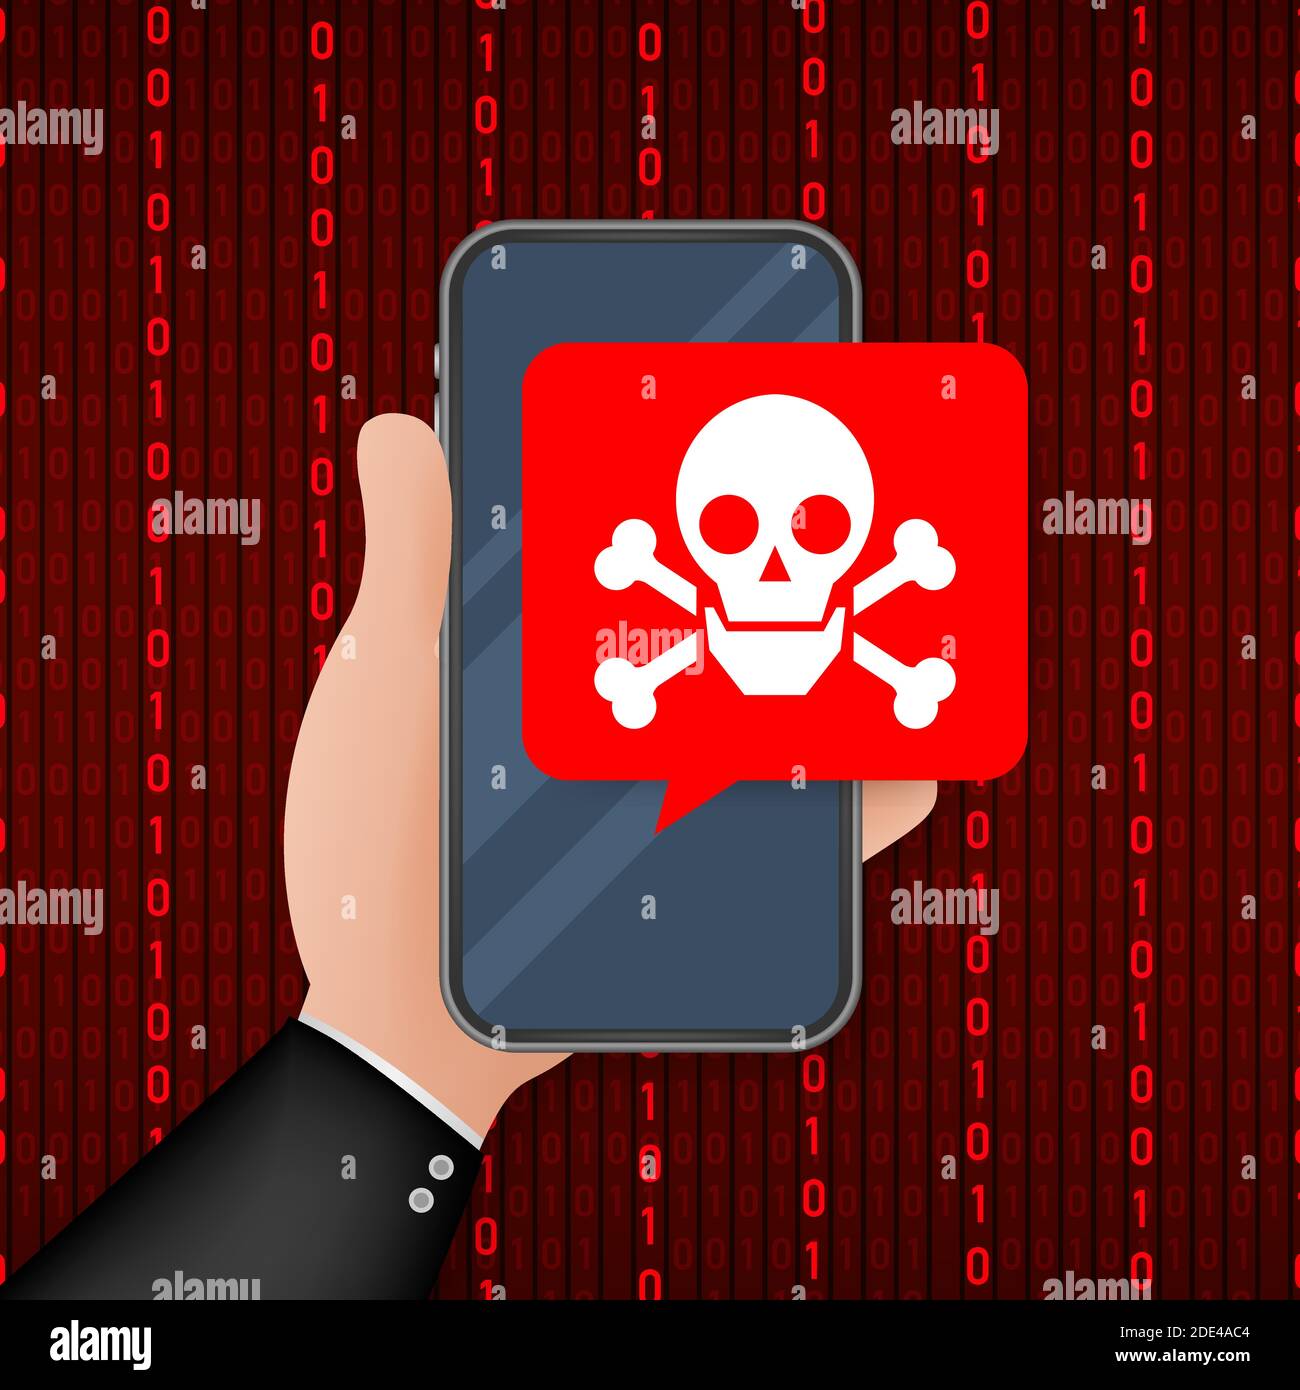 Attack. Smartphone with speech bubble and skull and crossbones on screen. Threats, mobile malware, spam messages. Vector stock illustration. Stock Vector